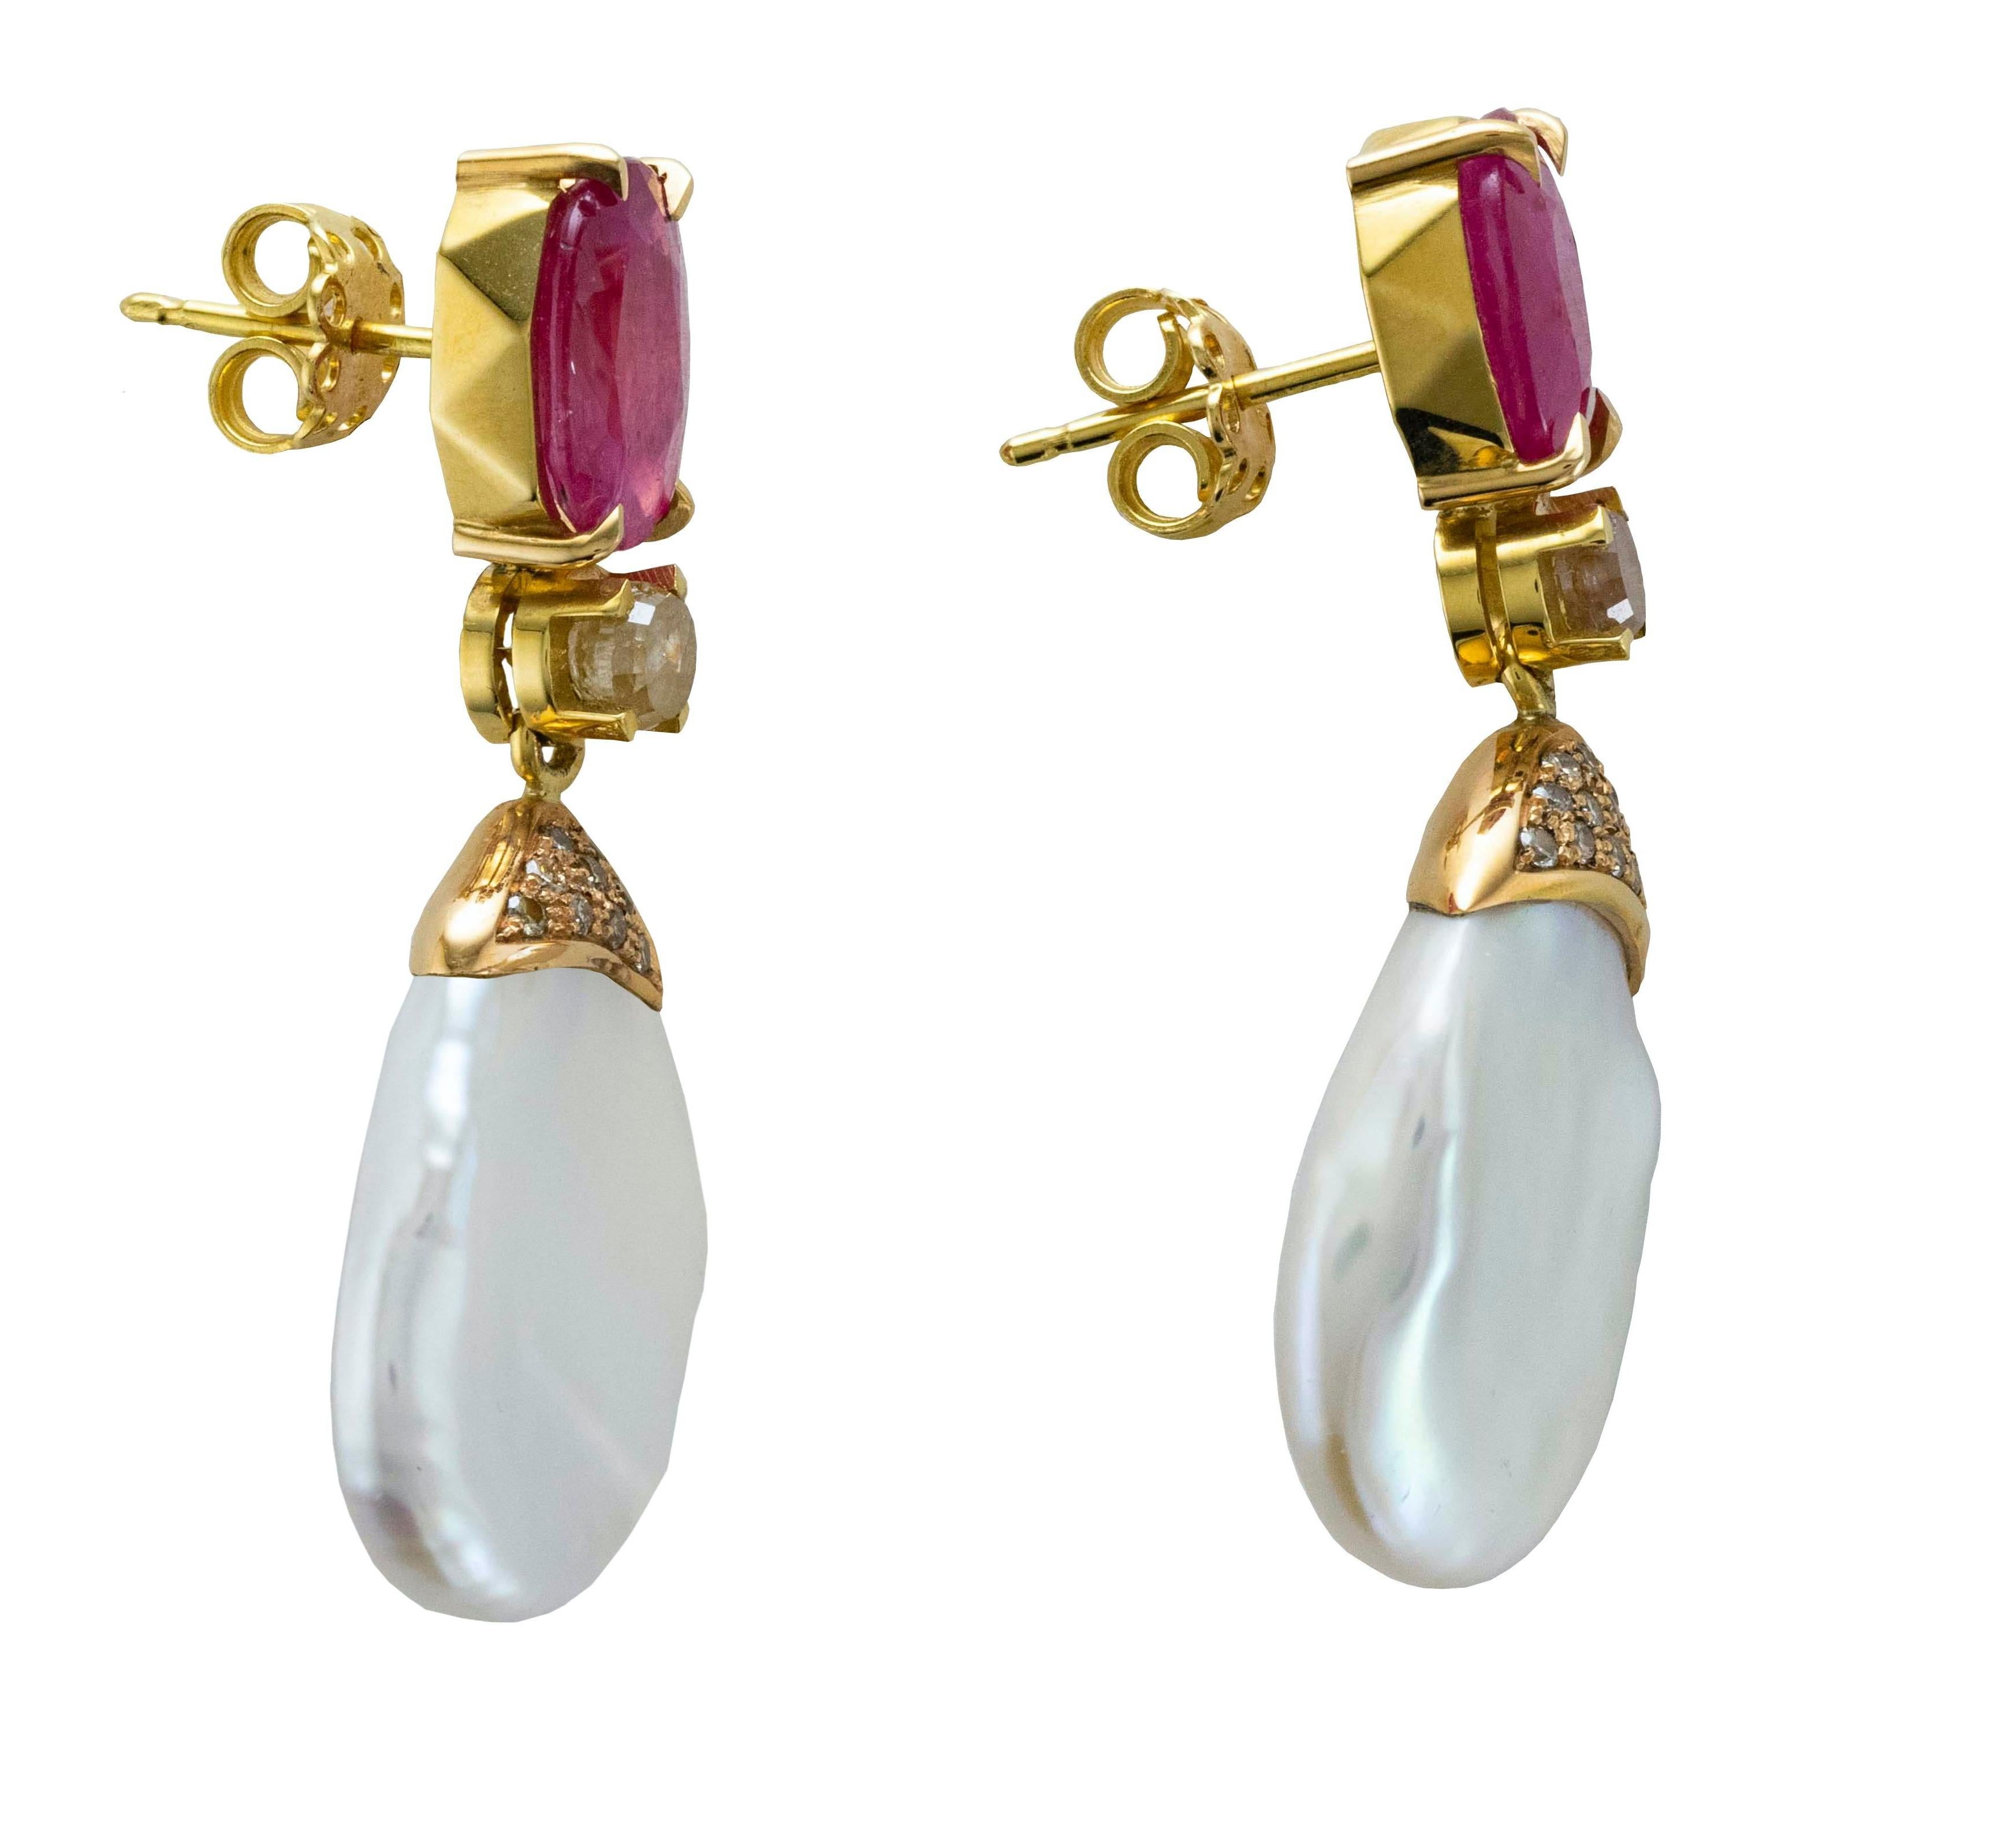 18 Karat yellow gold drop earrings made up from irregular shape pearls which catch the light and reflect it in various colors, from pink to green.
They are settled from two oval cut Rubies and embellished from two Old cut brown Diamonds.
Thy light